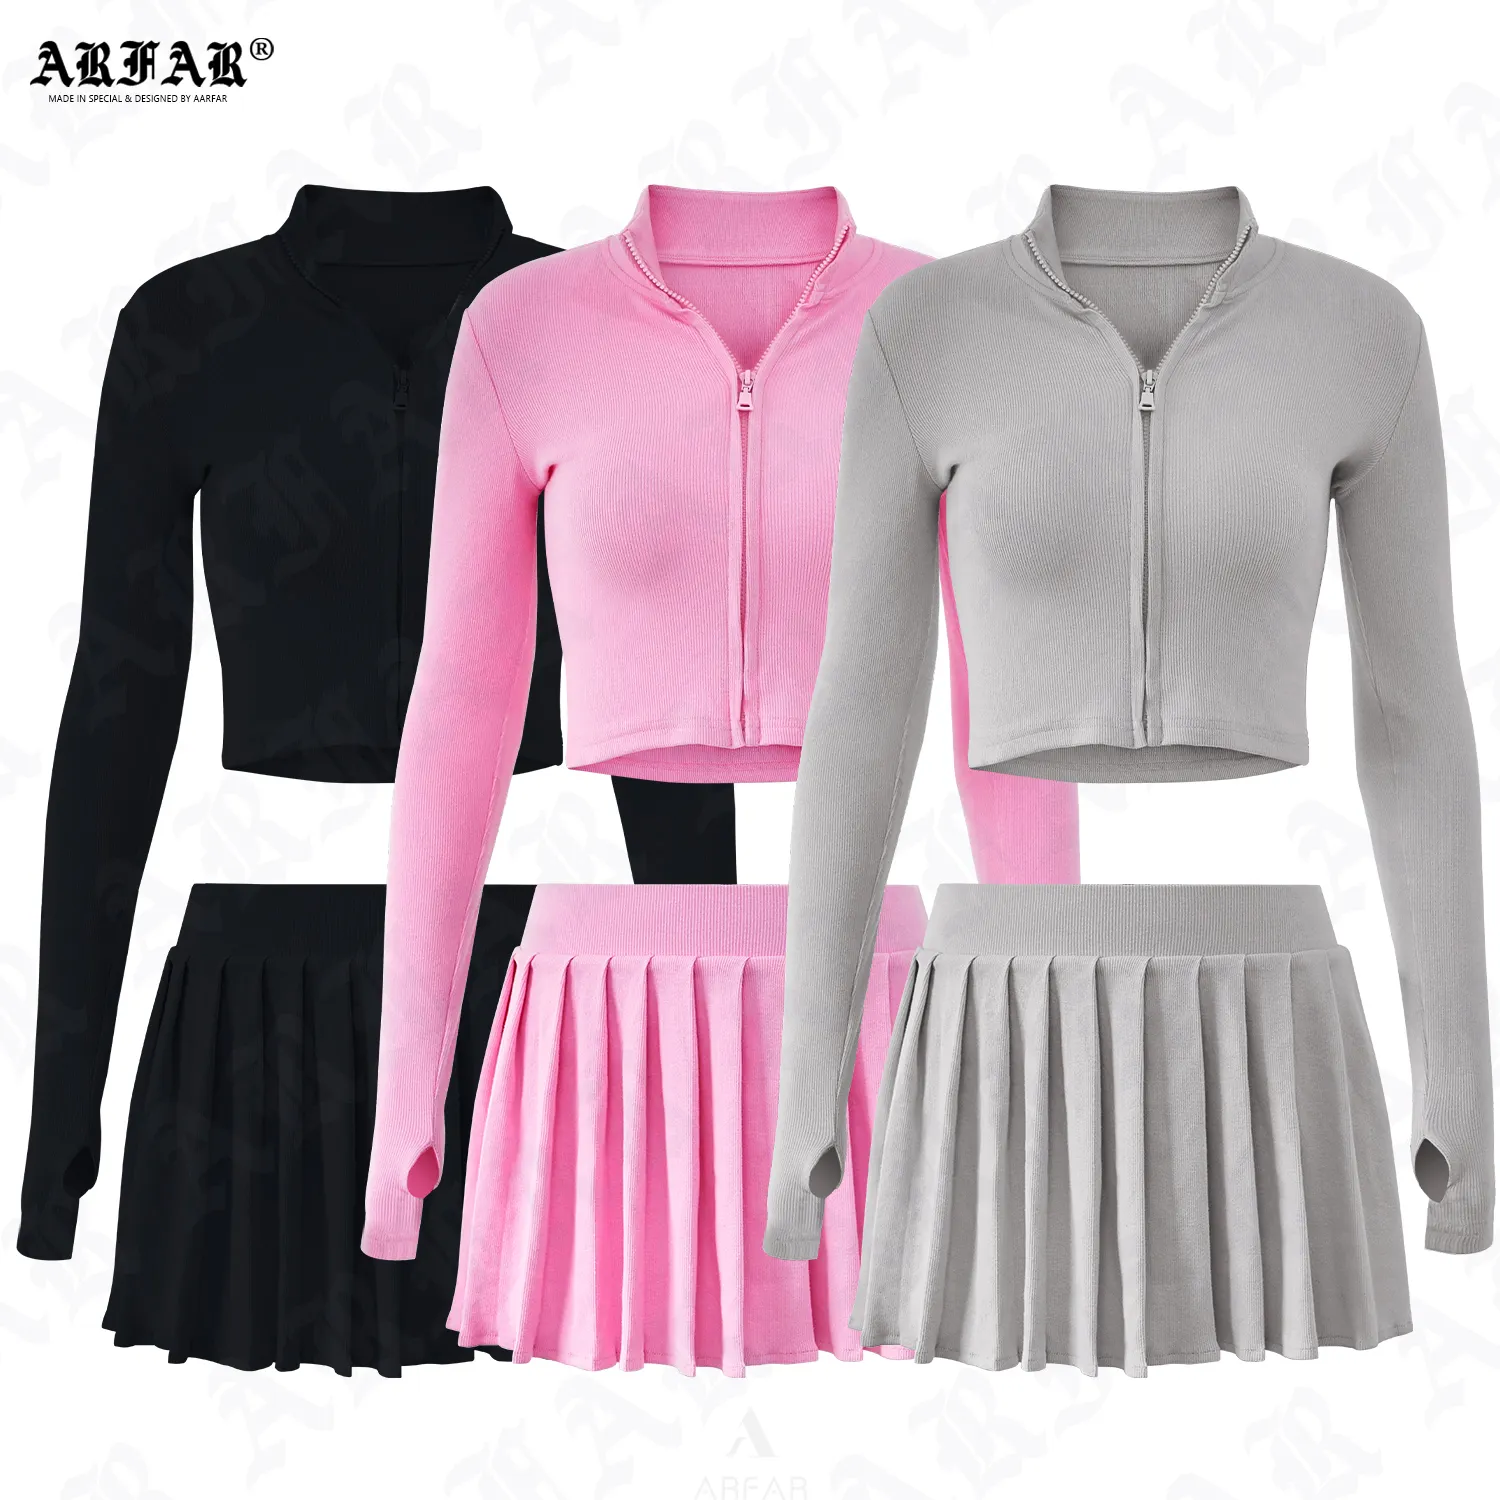 Shorts Skirts Summer Mini Skirt Tracksuit Zip up Ribbed Custom Clothing Solid Workout Sets for Women